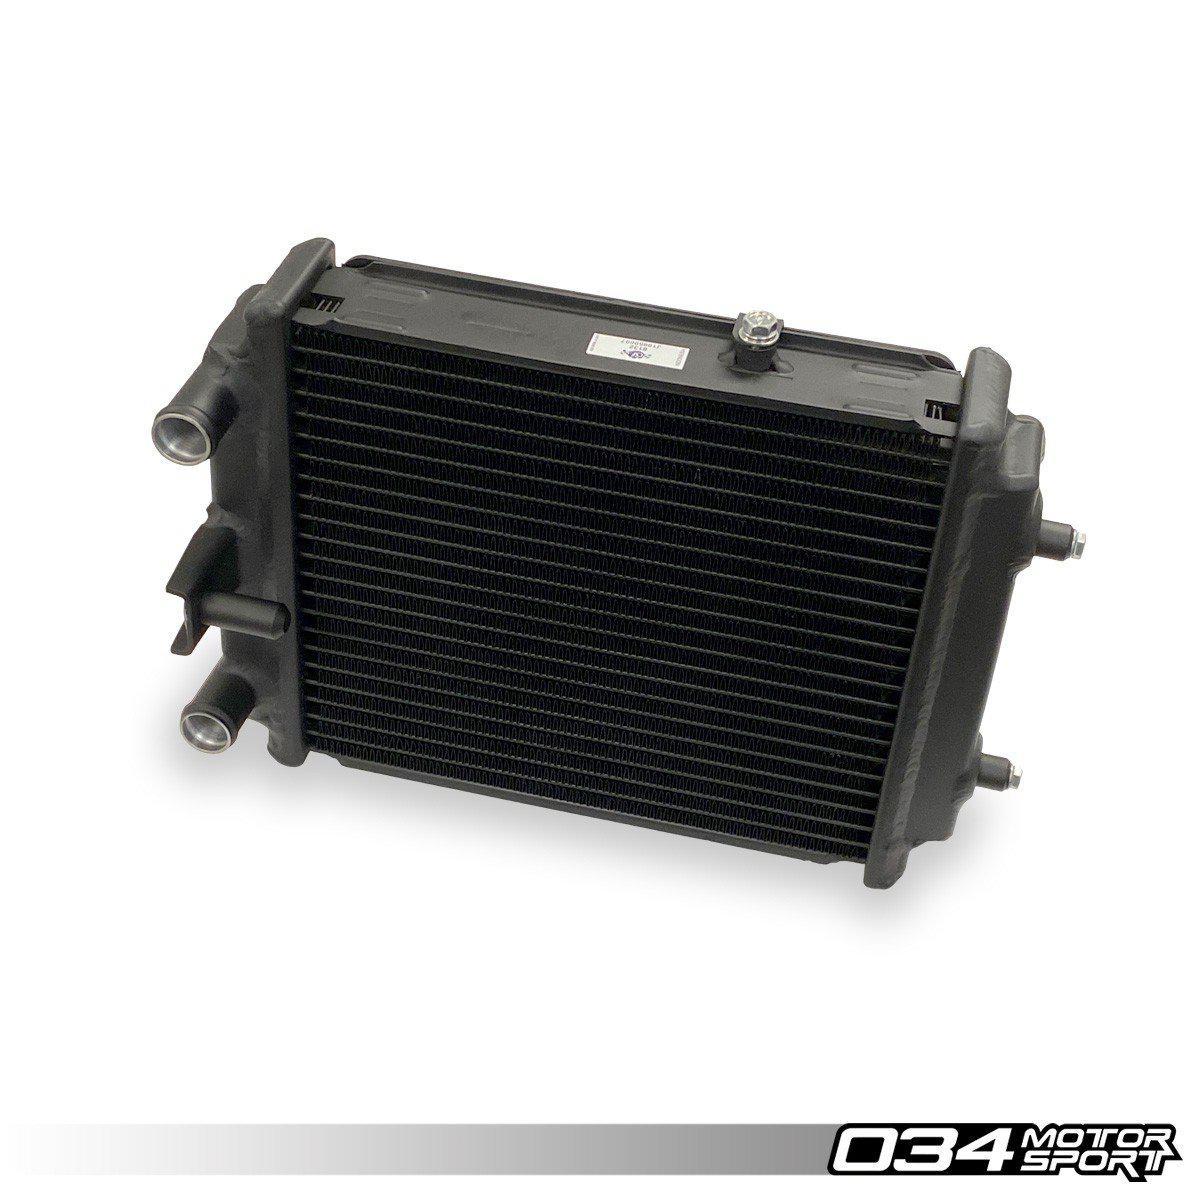 CSF Auxiliary Heat Exchanger, Audi 8V A3/S3 8S Tts And Volkswagen MKVII Golf R-A Little Tuning Co